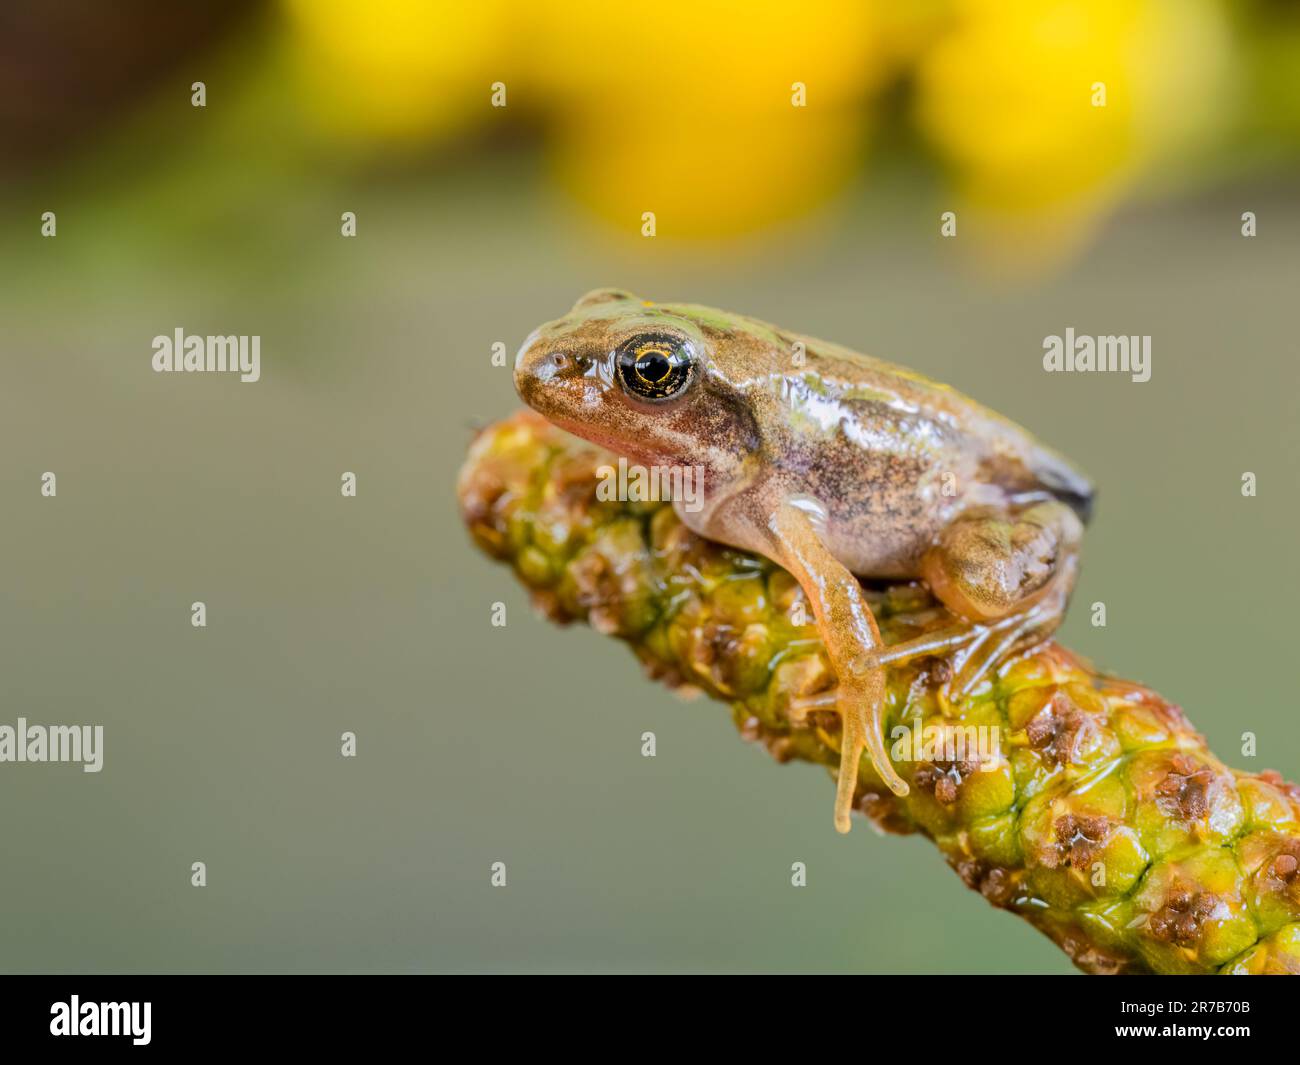 Common froglets photographed in a controlled environment before being returned to the same spot where the yhad been found. Stock Photo